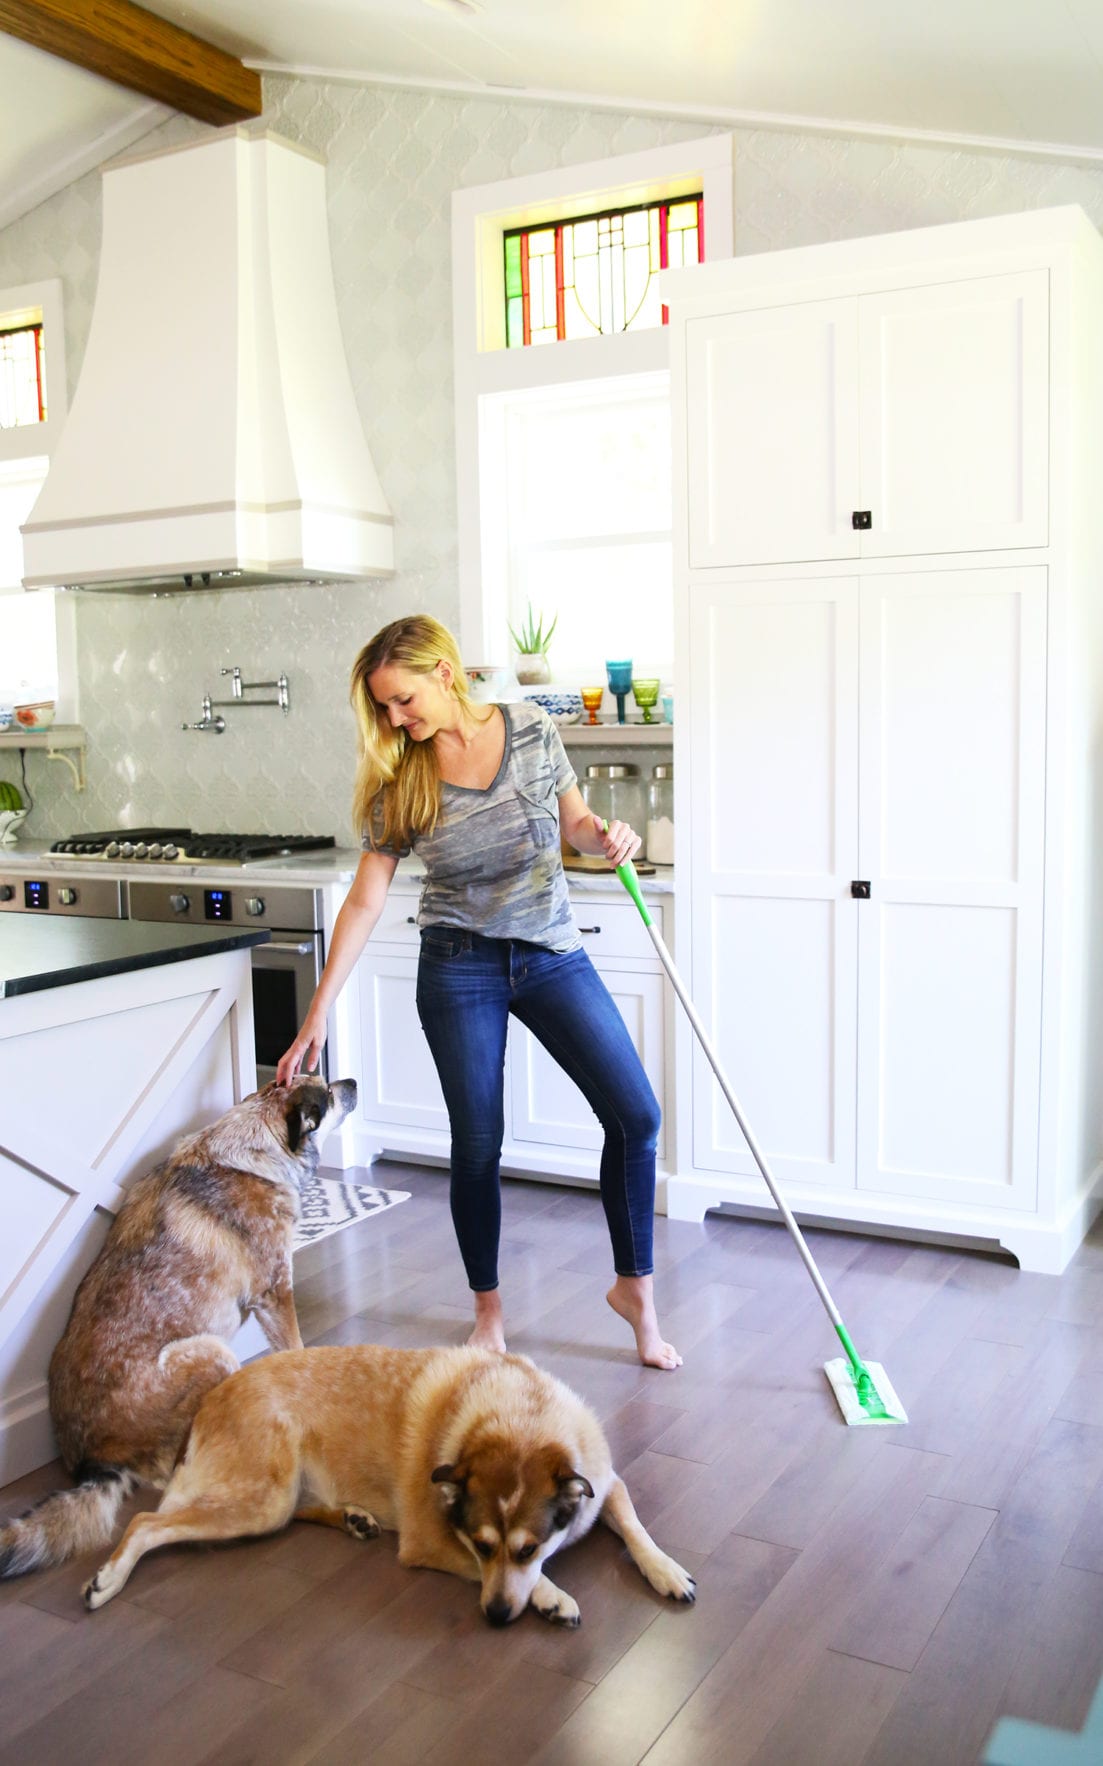 how to keep your house clean with pets